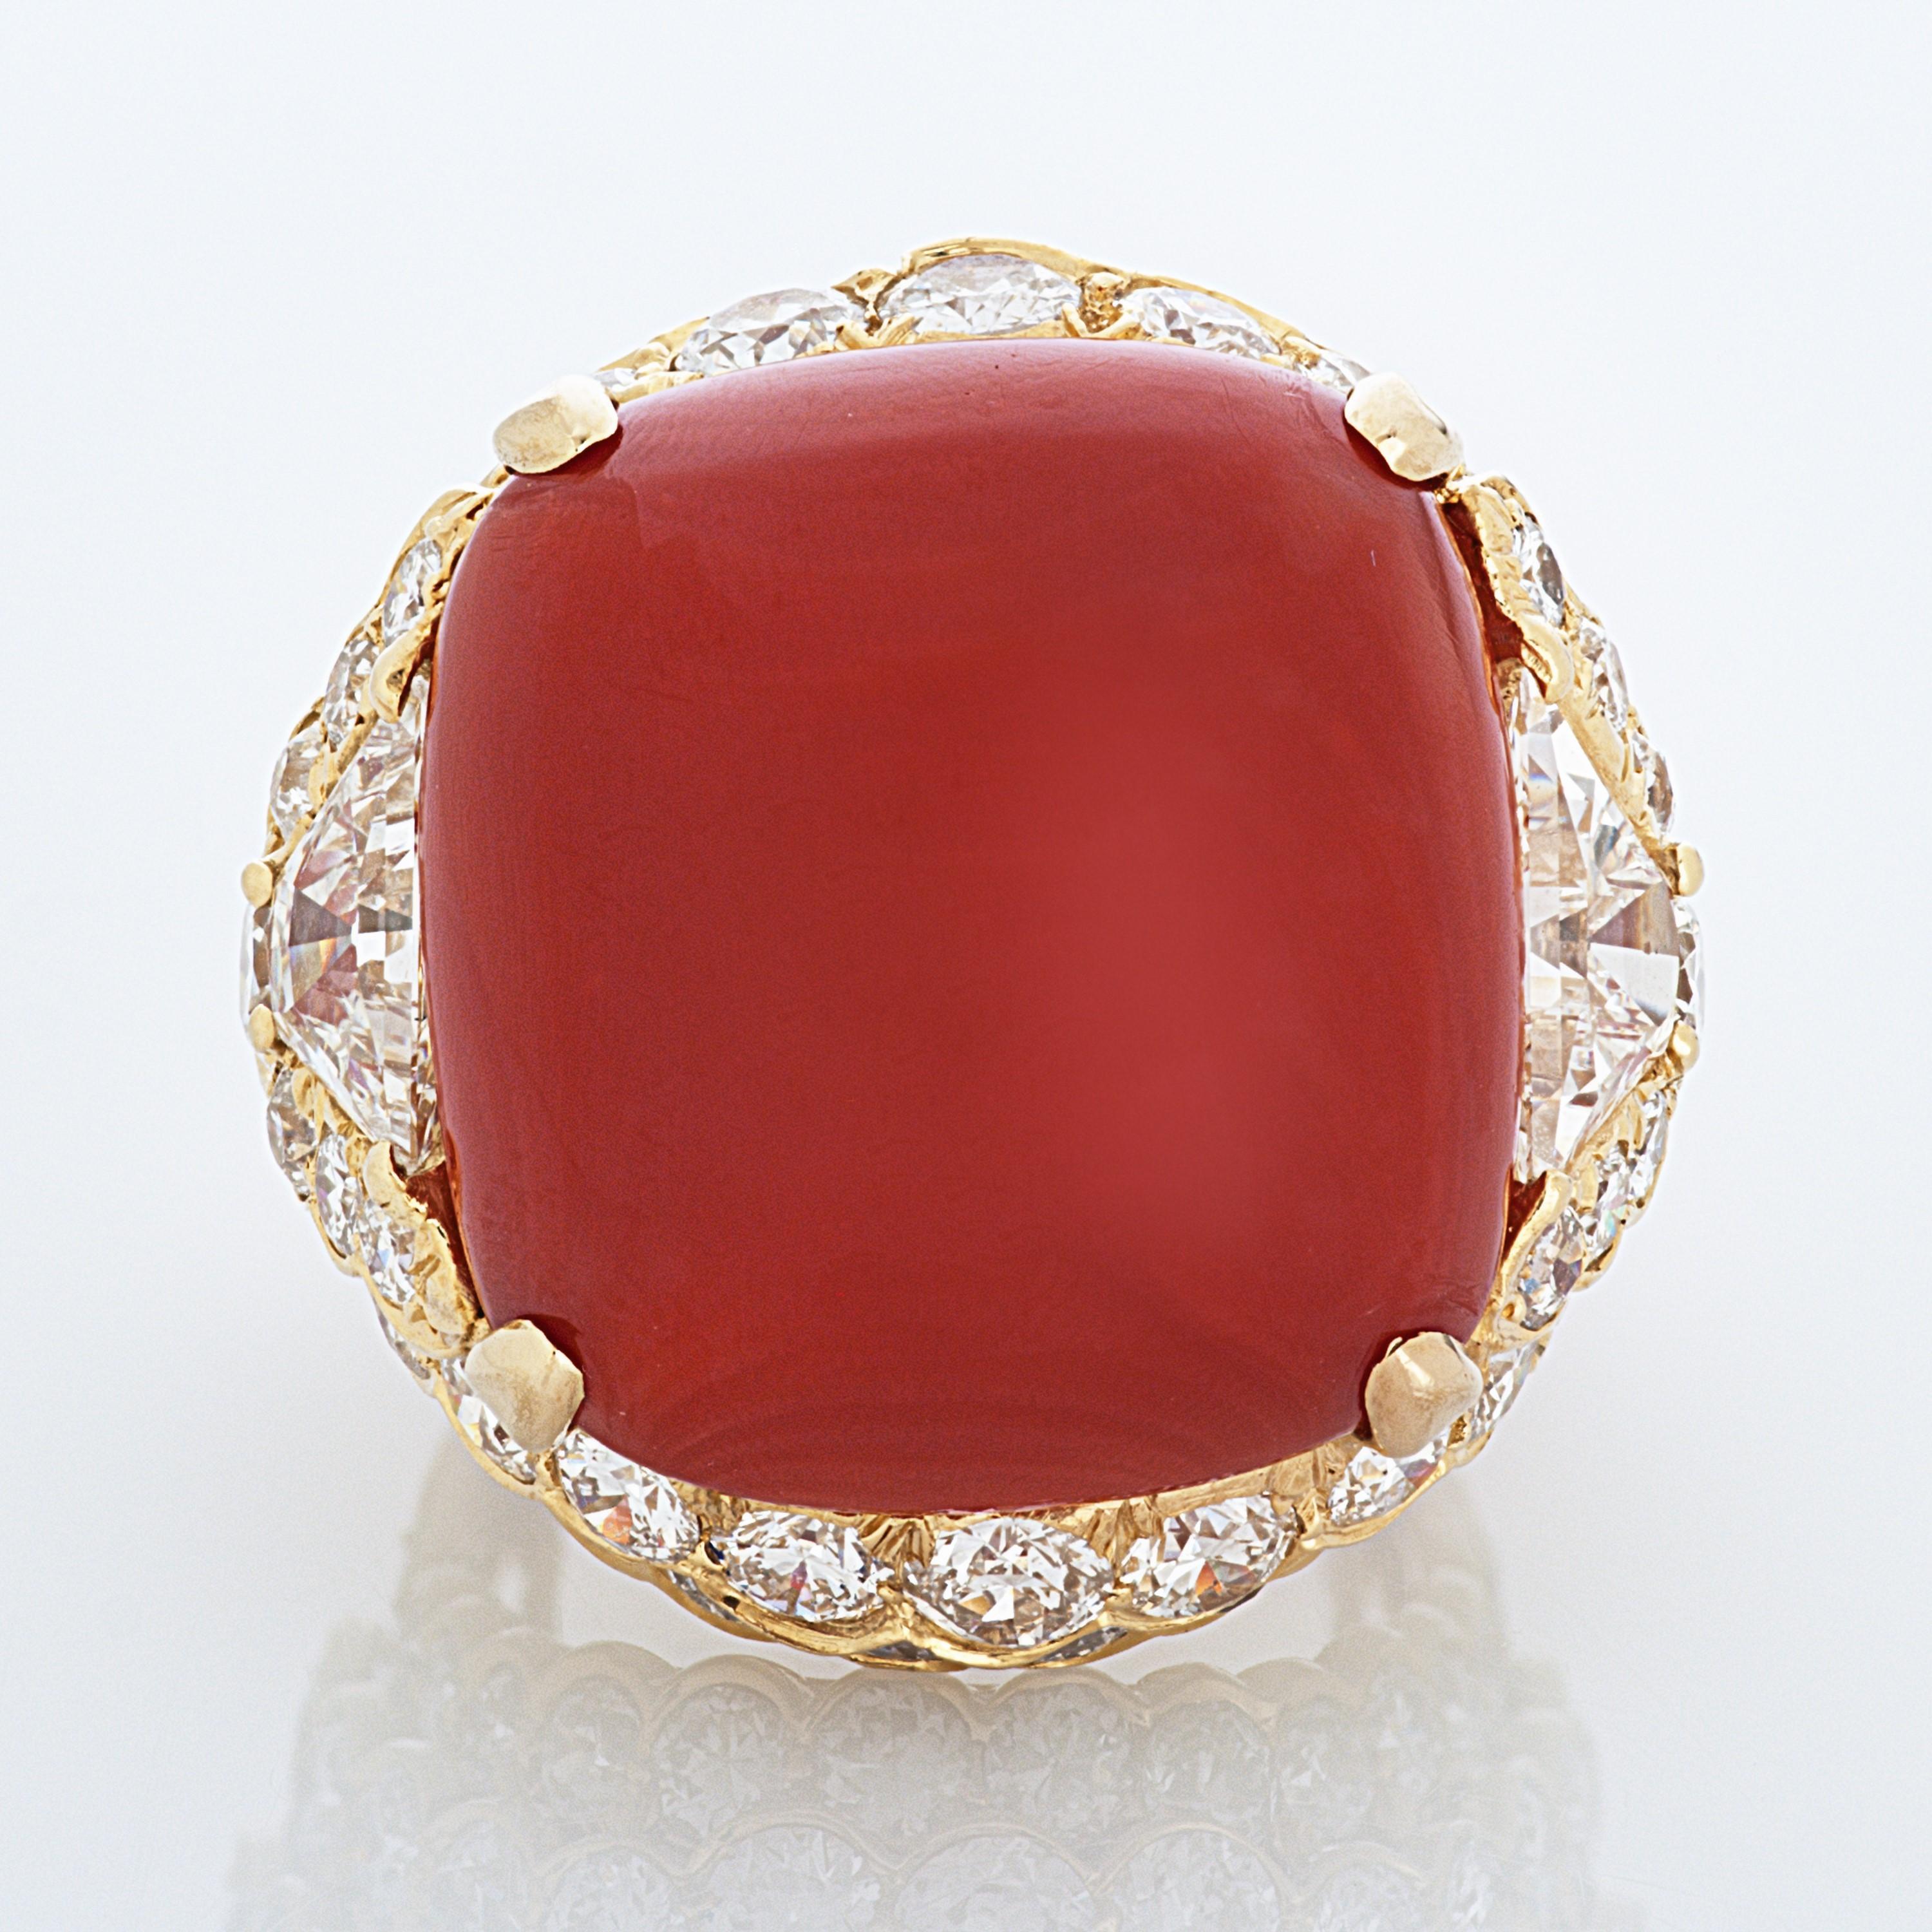 David Webb Cabochon Coral and Diamond Ring in 18 Karat Yellow Gold, accompanied by a David Webb box and David Webb Certificate of Authenticity.

The center stone of this ring is a cabochon coral measuring 20.9mm by 19.6mm, it is accented by a